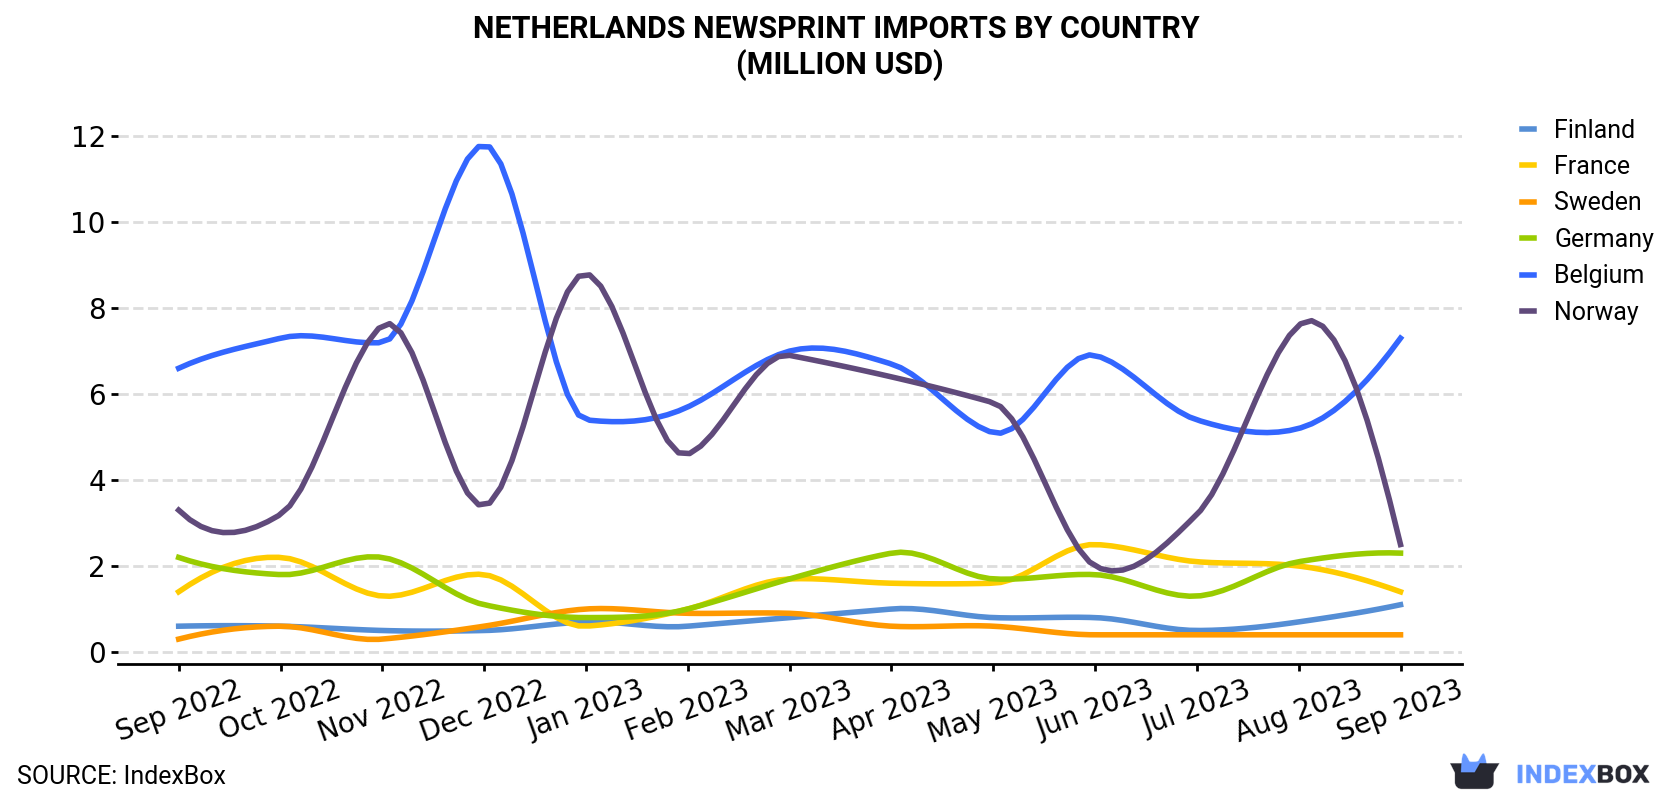 Netherlands Newsprint Imports By Country (Million USD)